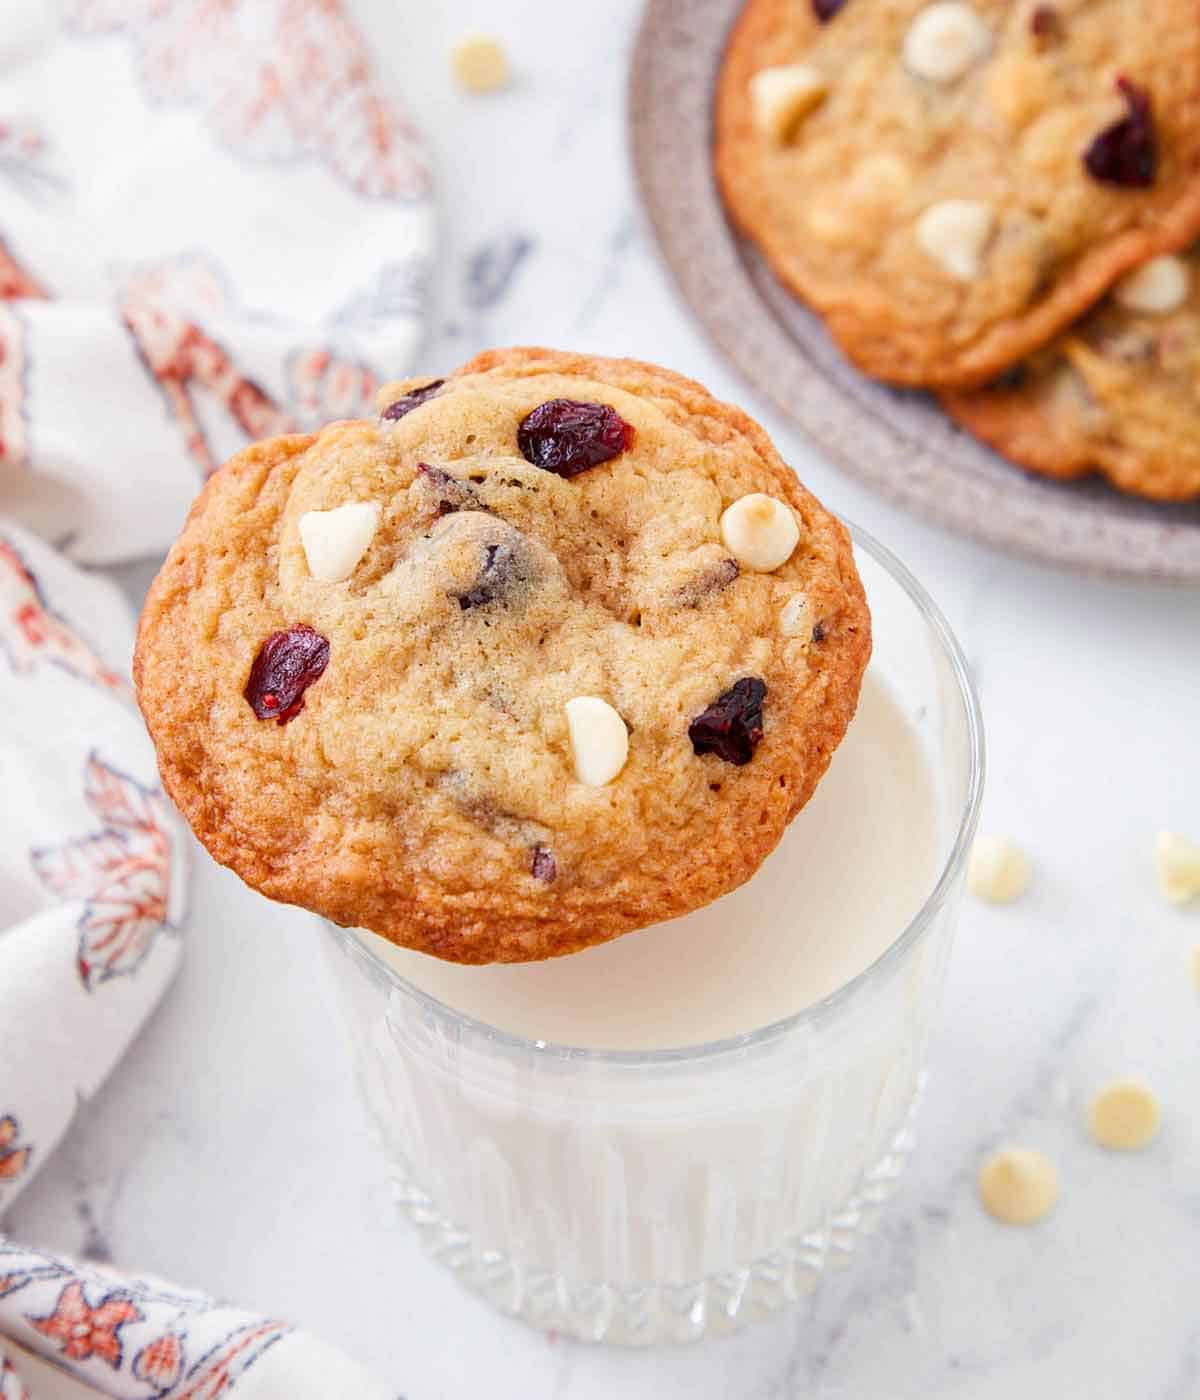 Overhead view of a white chocolate cranberry cookie on top of a glass of milk.